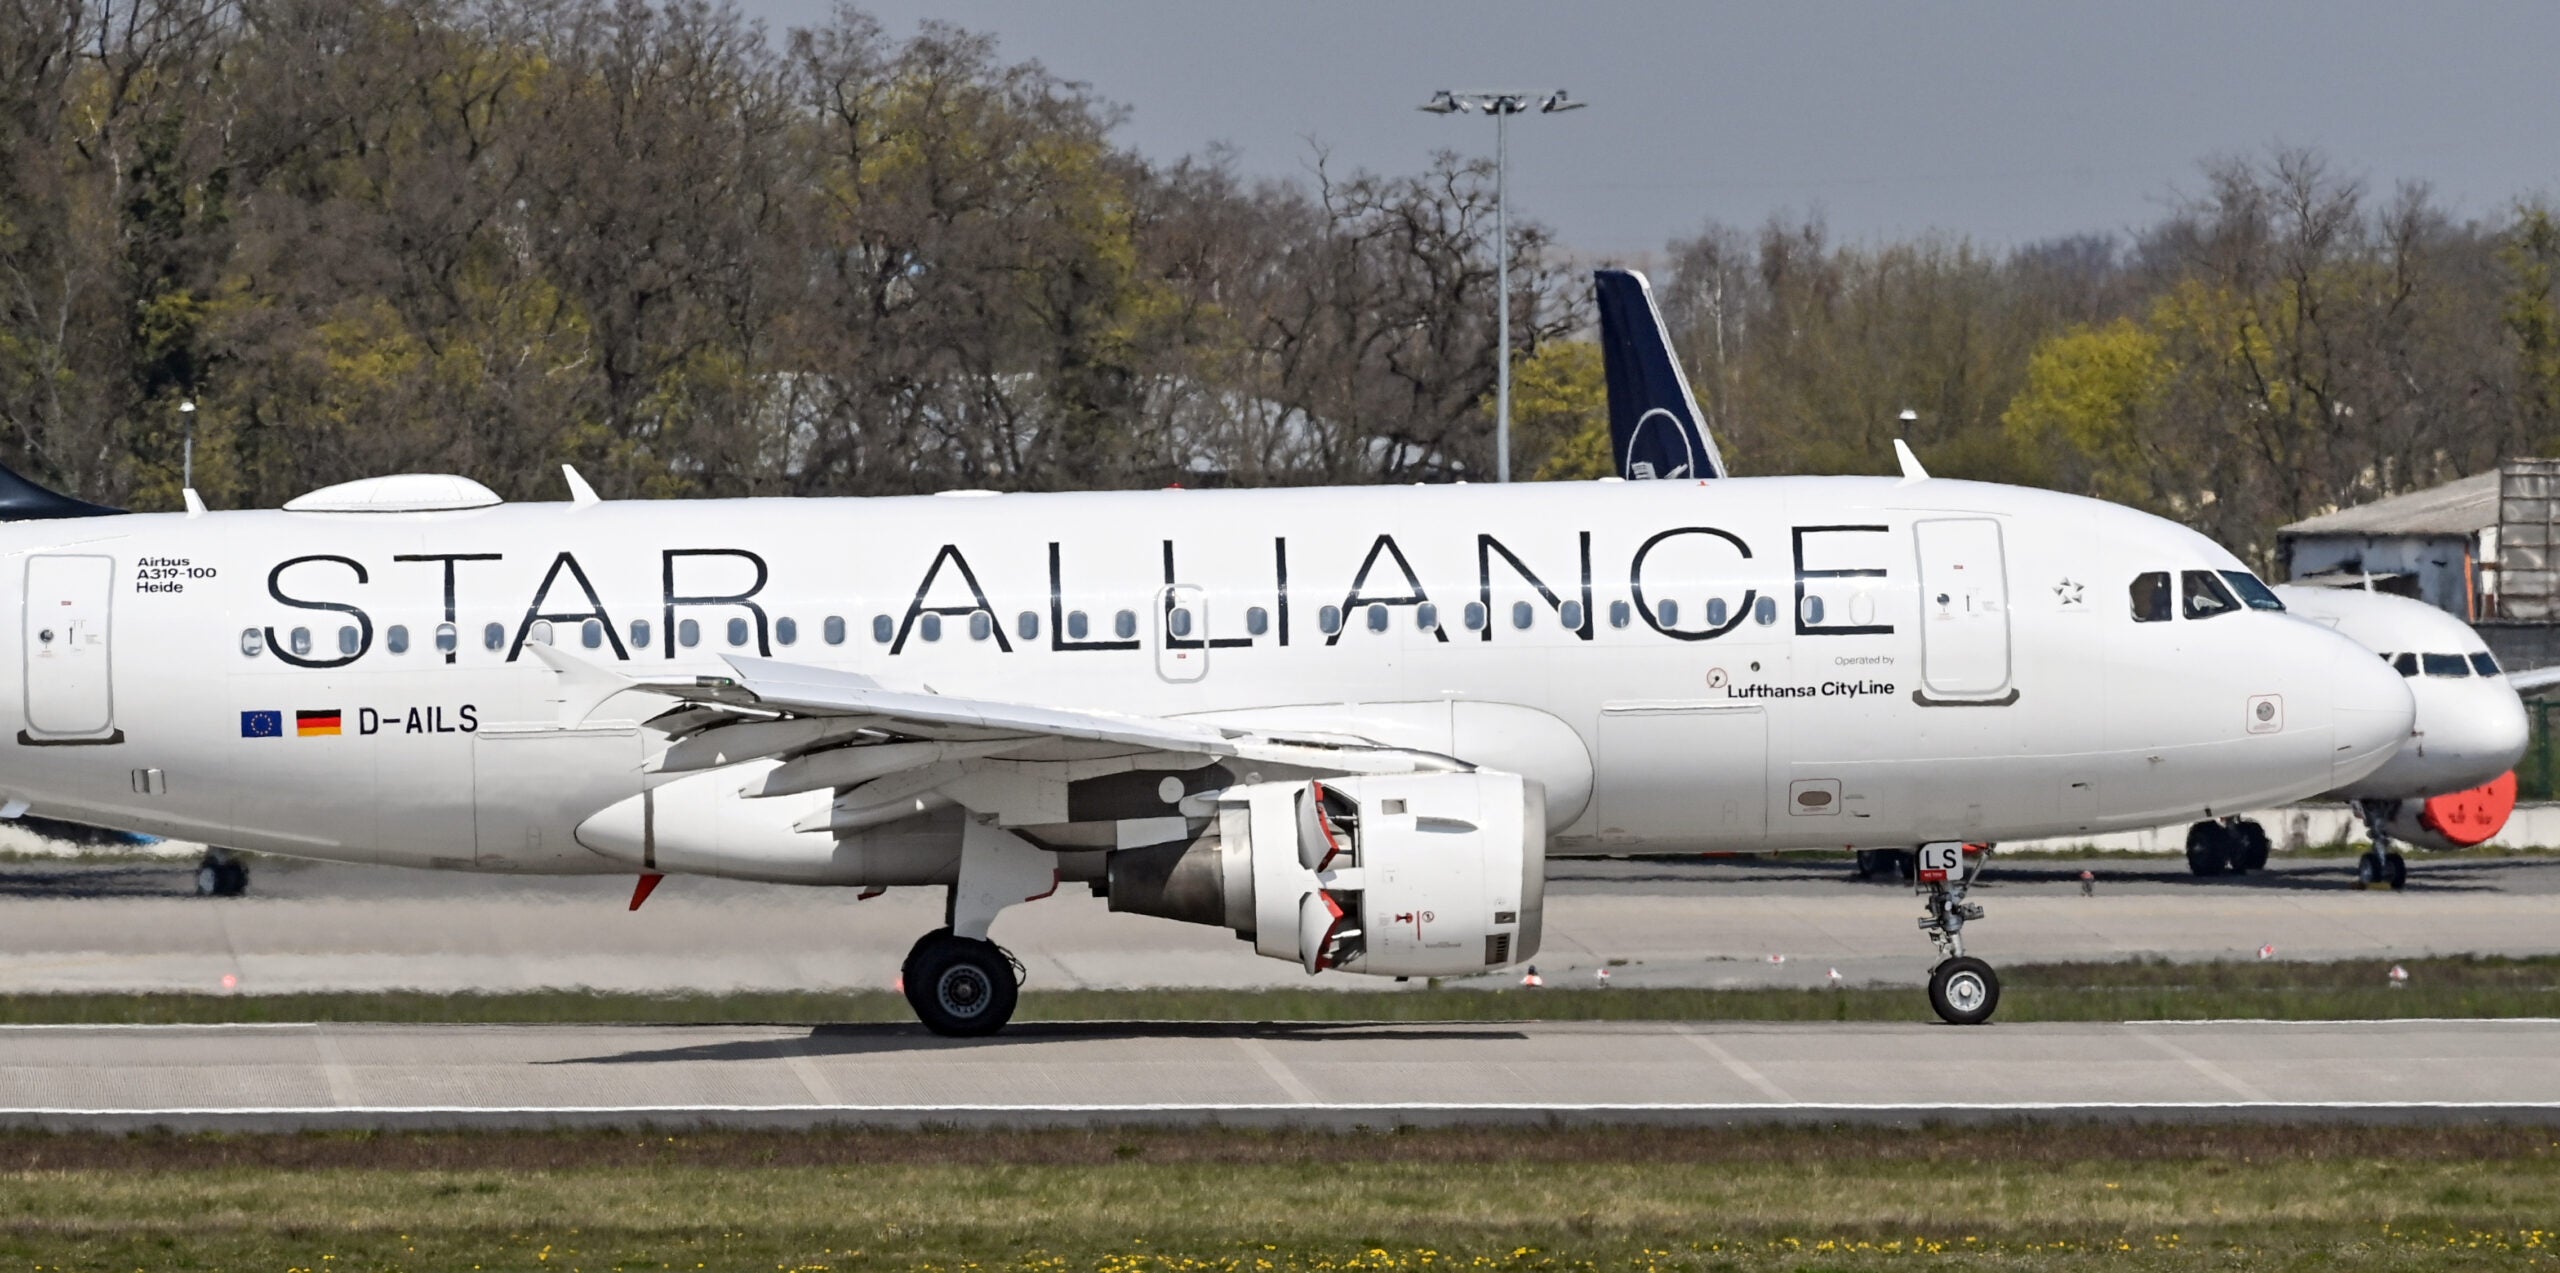 Lufthansa Airbus A319 in Star Alliance livery